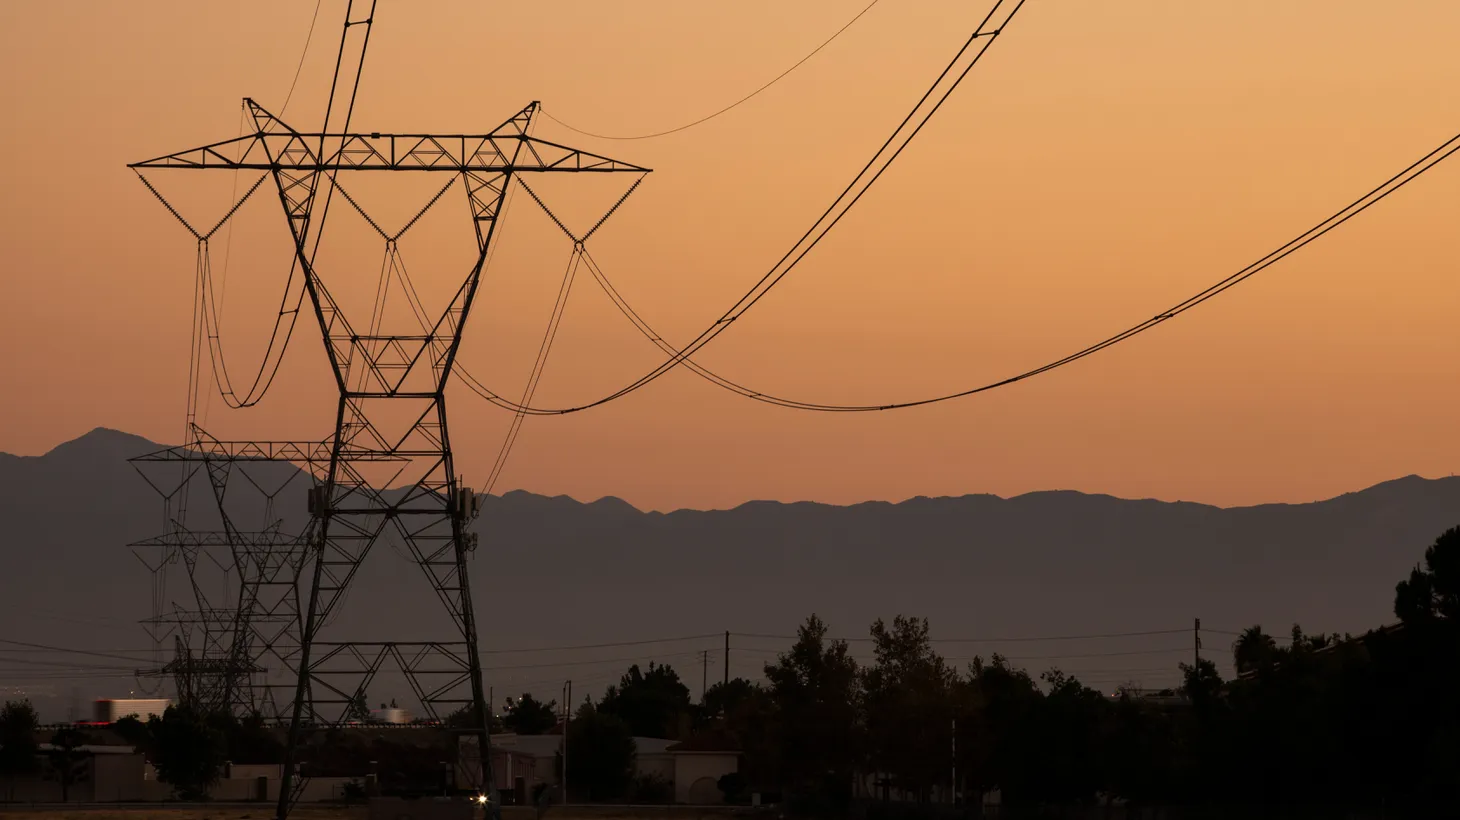 Next month, the Orange County Power Authority is set to serve more than 700,000 residents in Fullerton, Irvine, Buena Park and Huntington Beach.